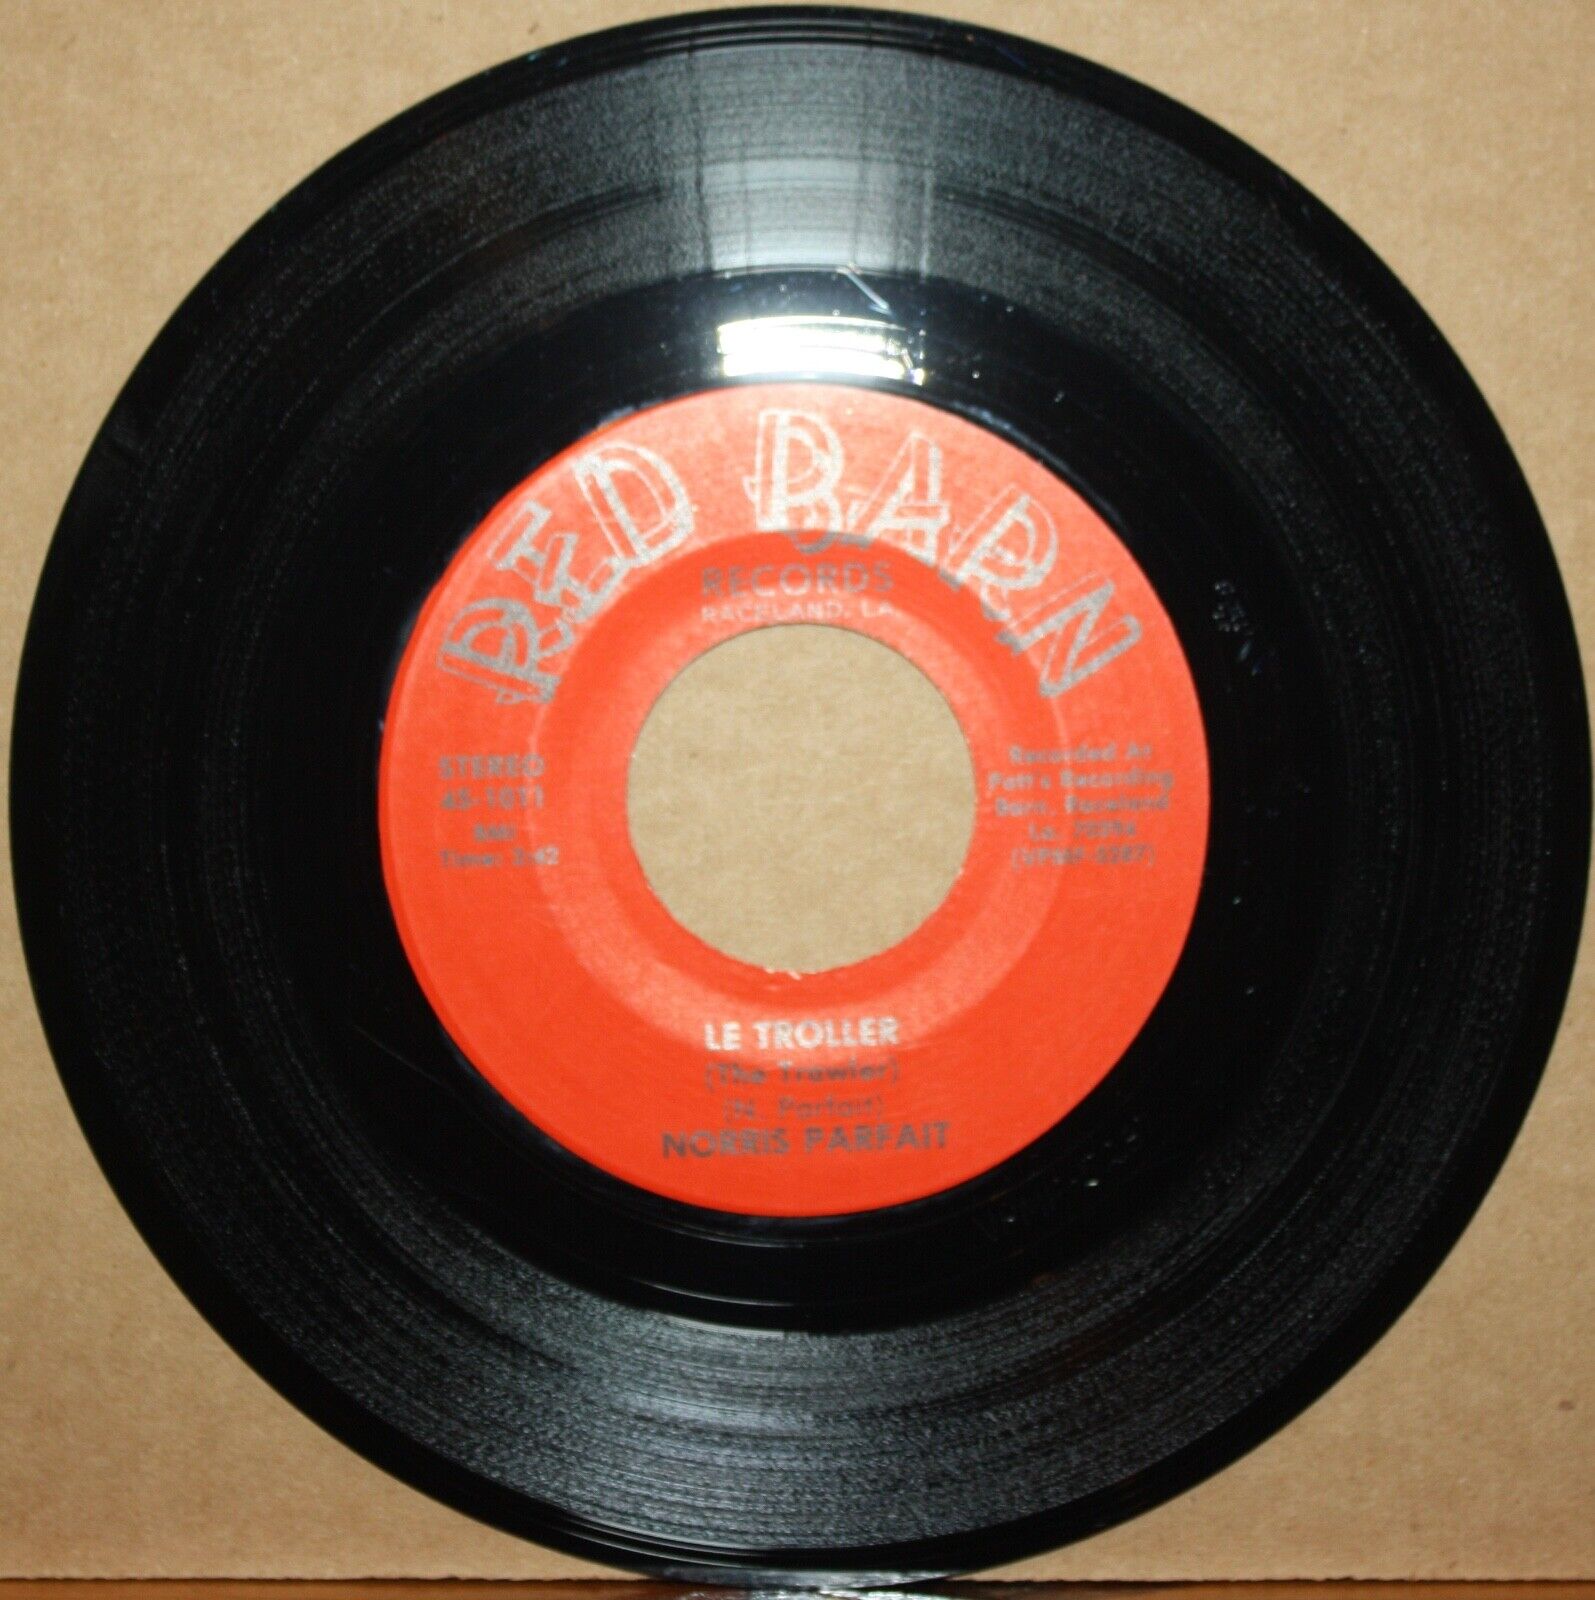 NORRIS PARFAIT **Le Troller** TRO LONTANT Cajun Country 45 on RED BARN 1011